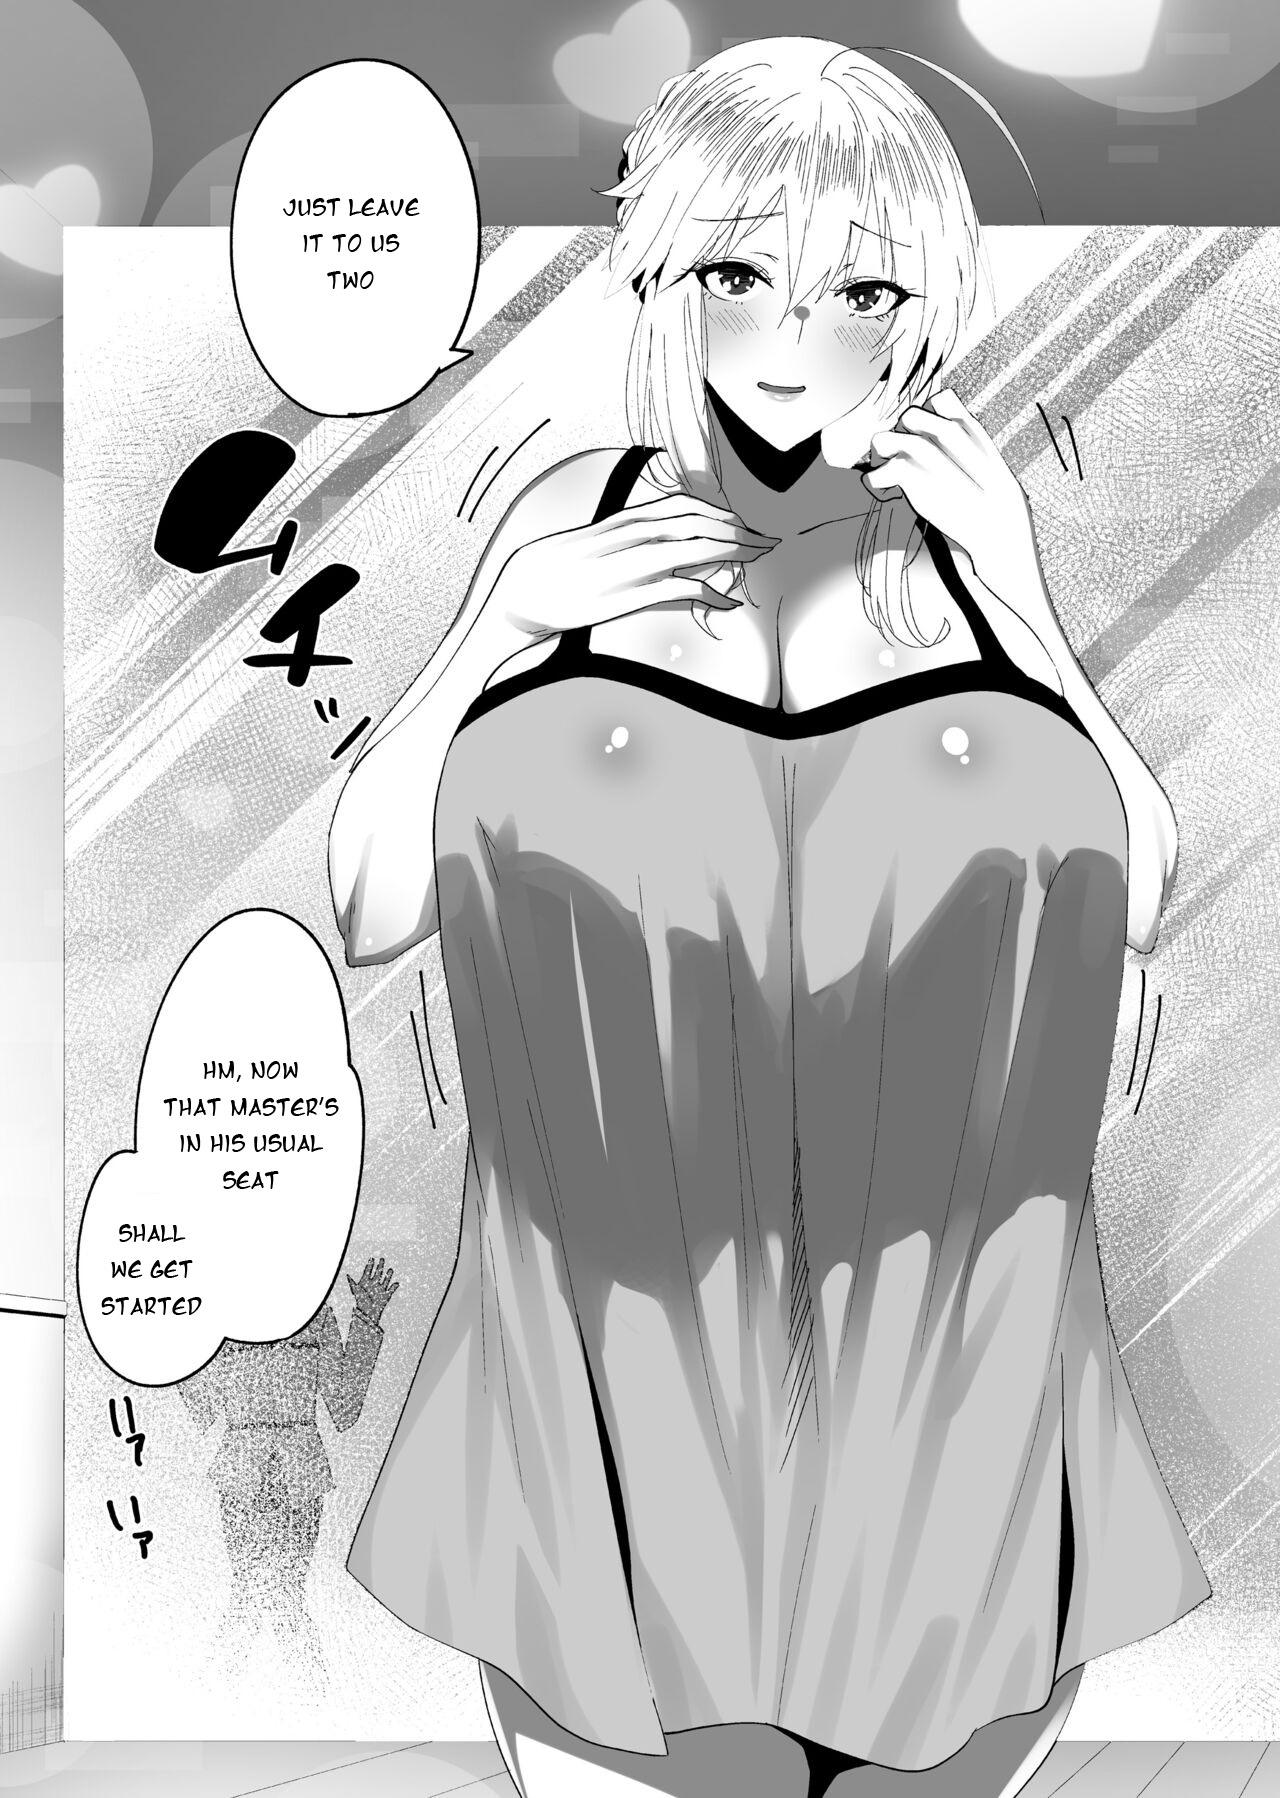 Peituda Kabe no Mukou de Kimi ga Naku 3 | On the other side of the wall, you're crying 3 - Fate grand order Casa - Page 6